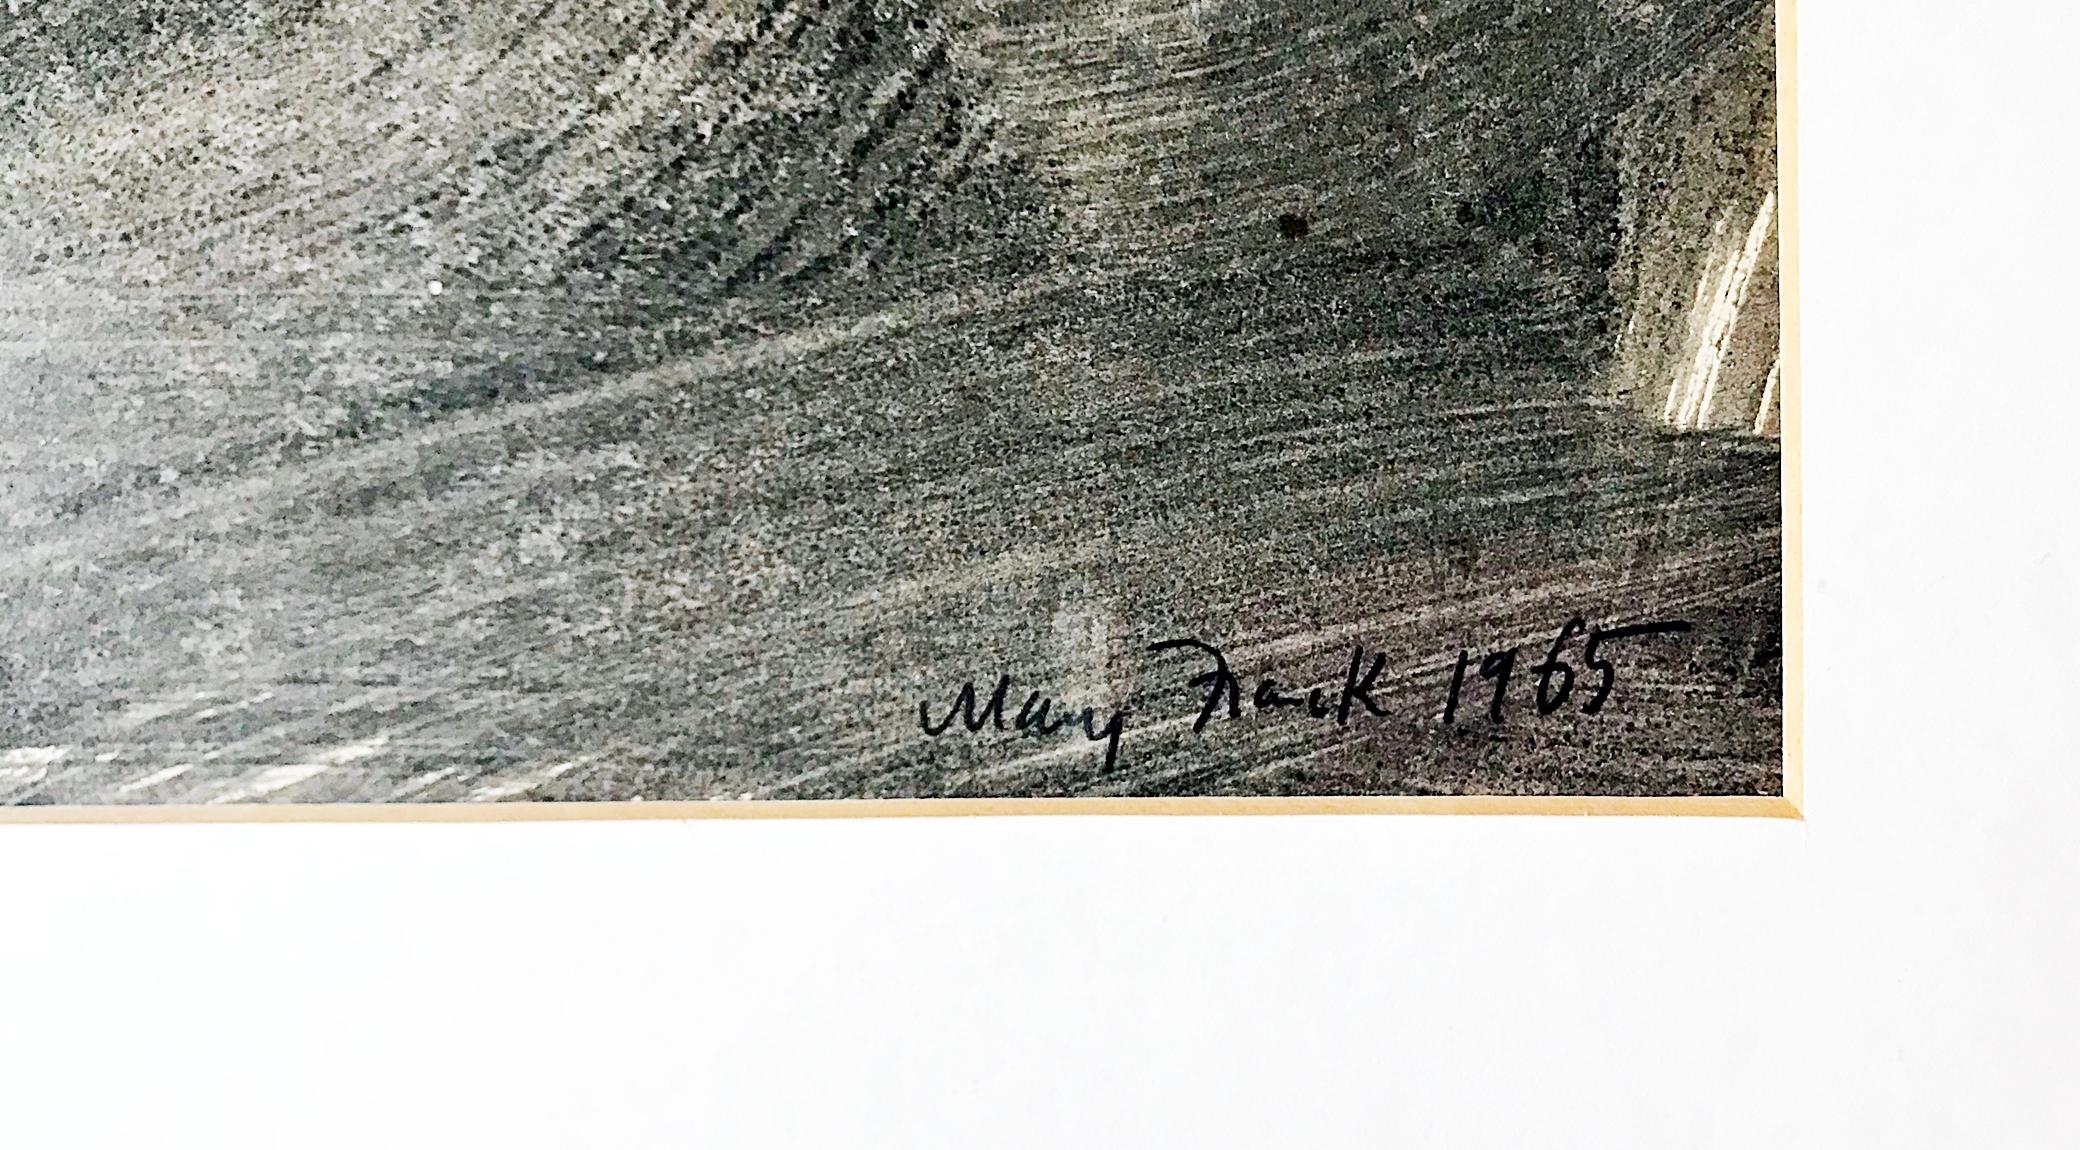 Mary Frank
Untitled Abstract Expressionist Mid Century Modern drawing, 1965
Pencil and Ink Wash on Paper
Signed and dated 1965 on the front
This is a unique work
Vintage frame with Christie's label included
Original pencil and ink drawing, signed